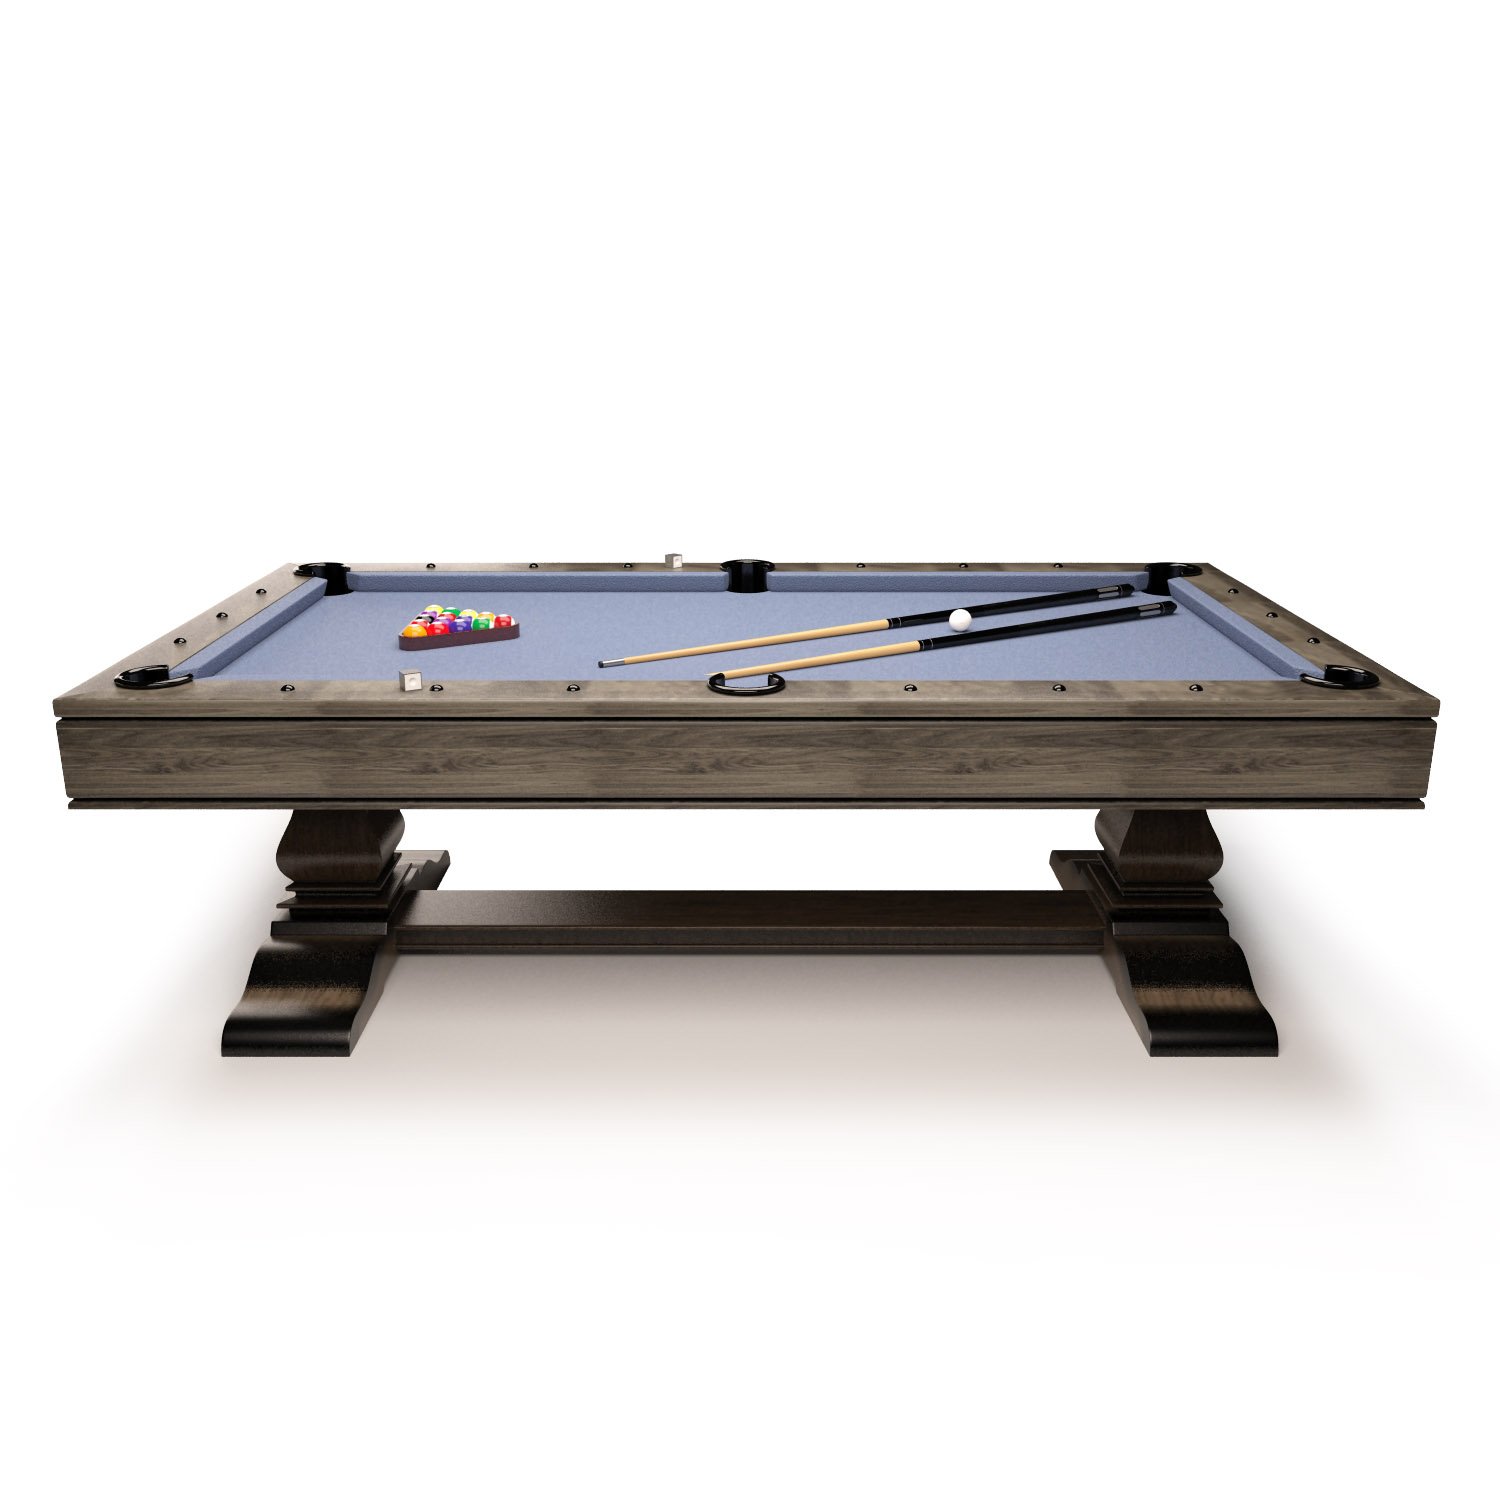 Connelly pool table models